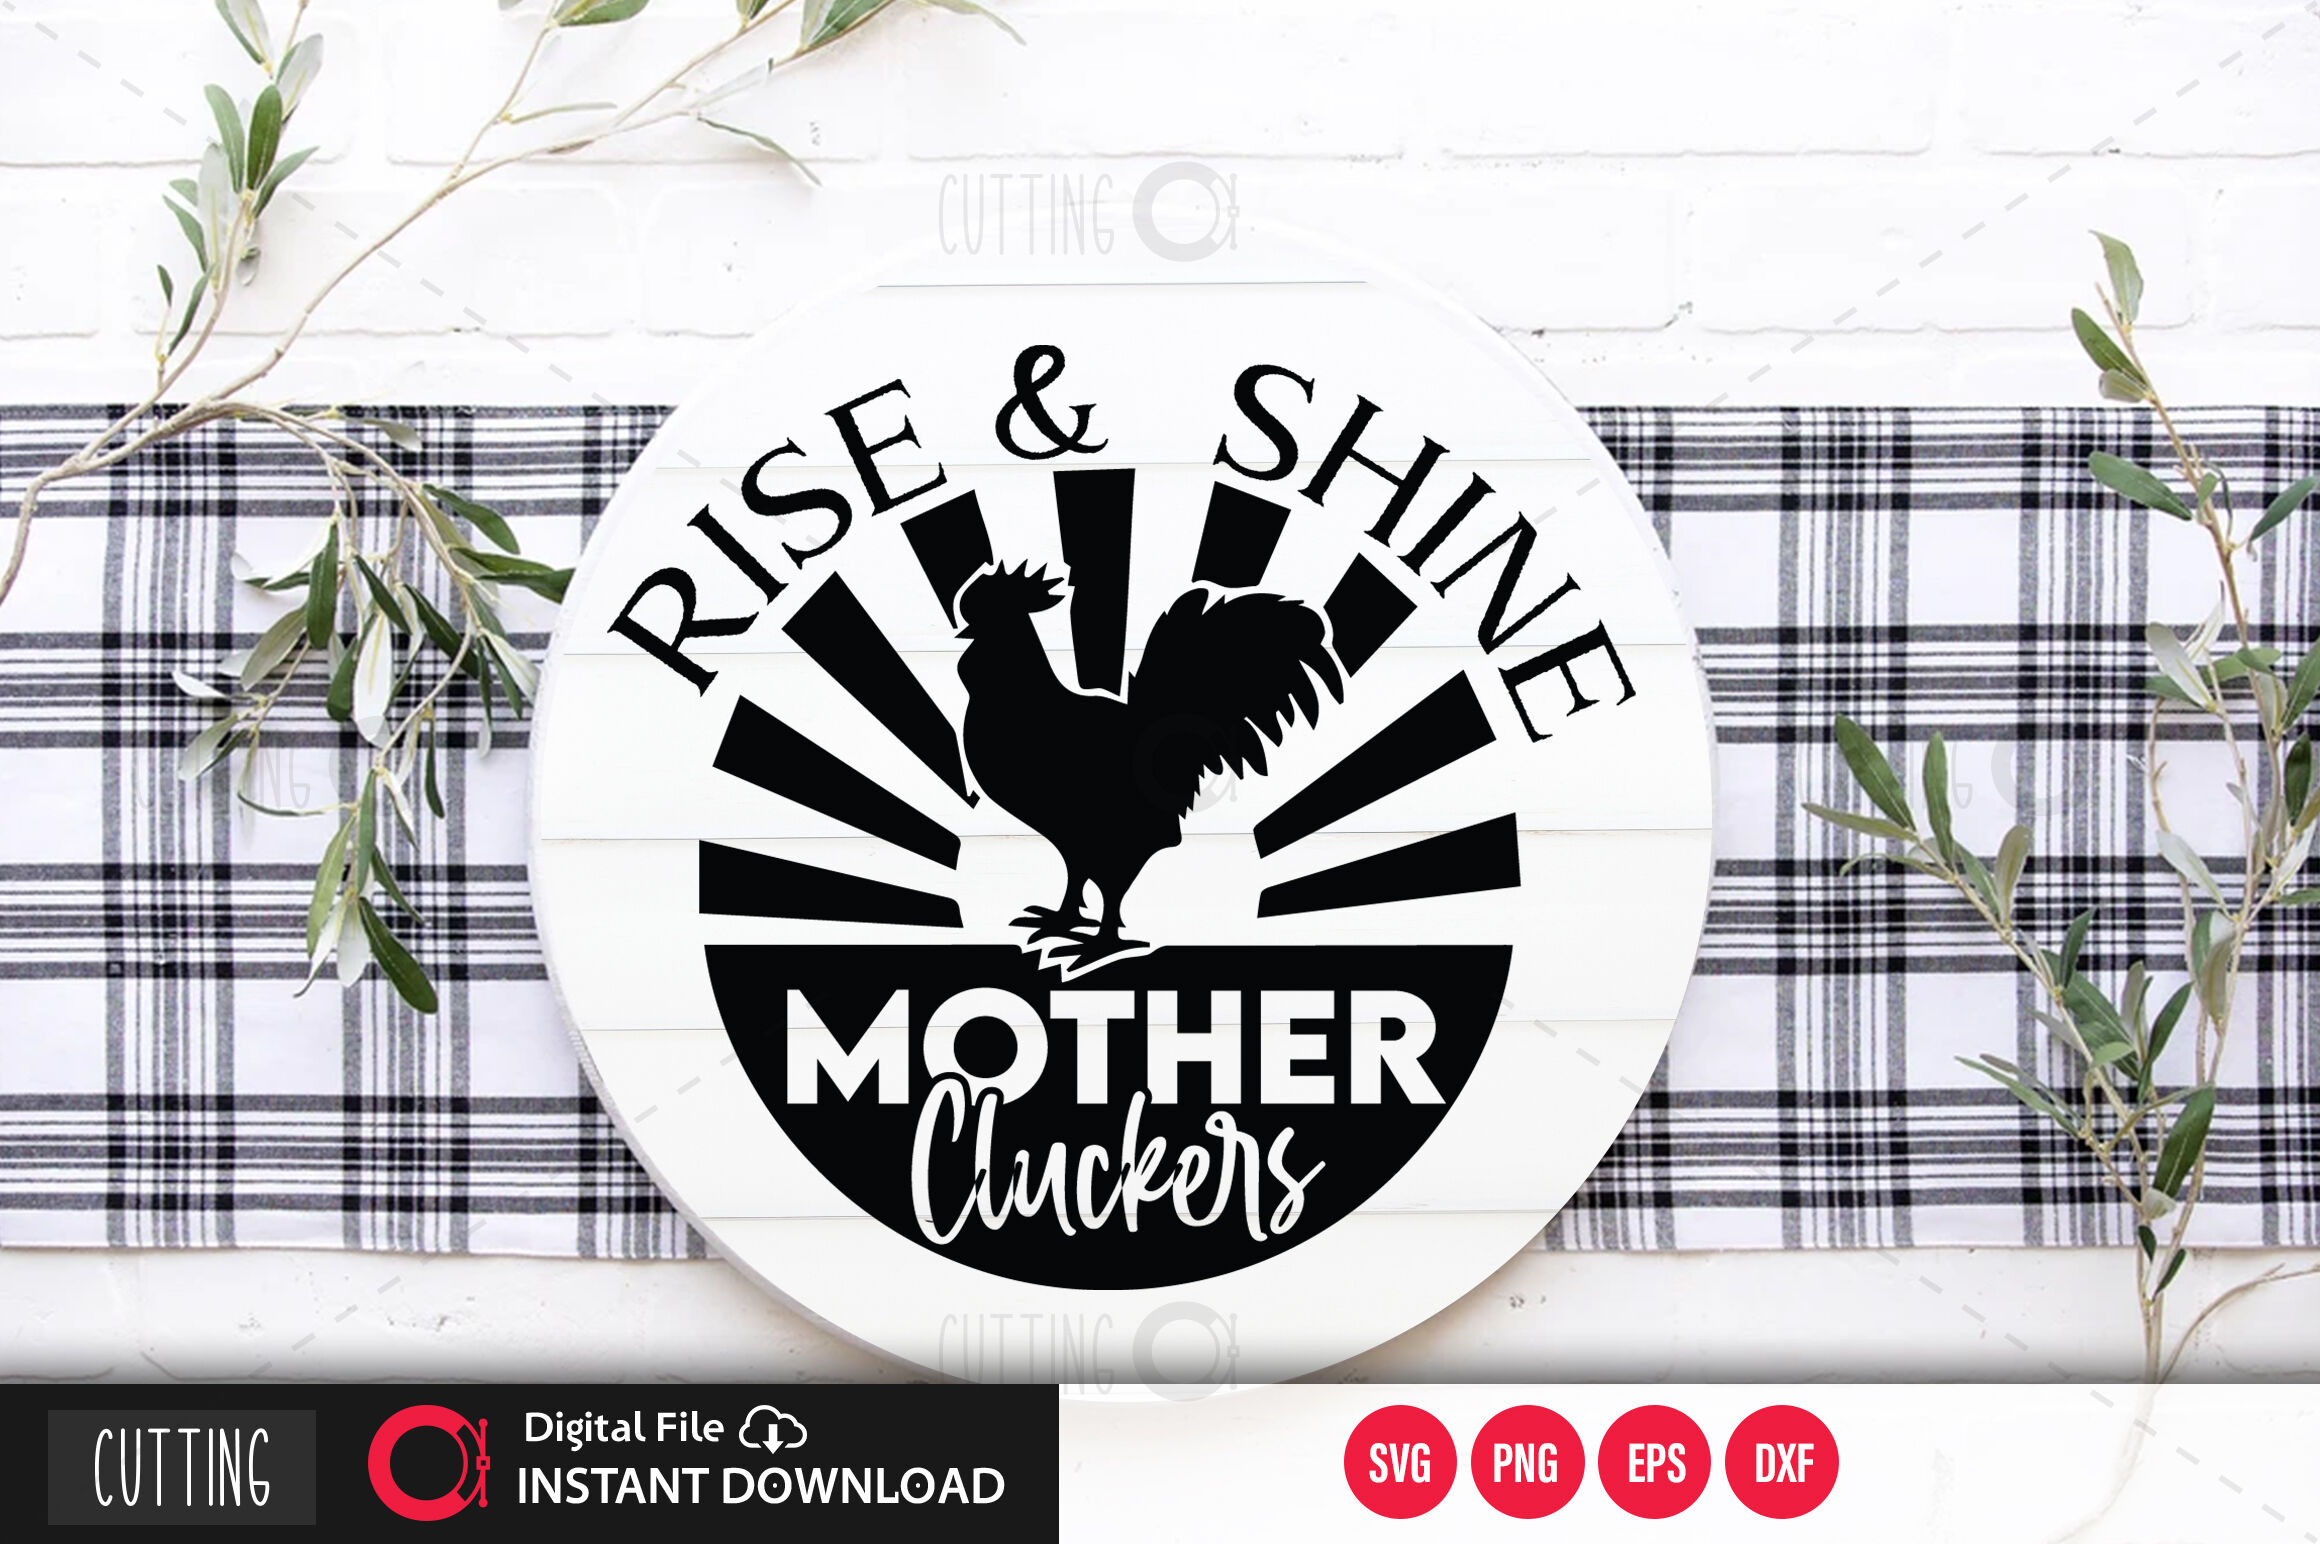 Download Rise Shine Mother Cluckers Svg By Designavo Thehungryjpeg Com